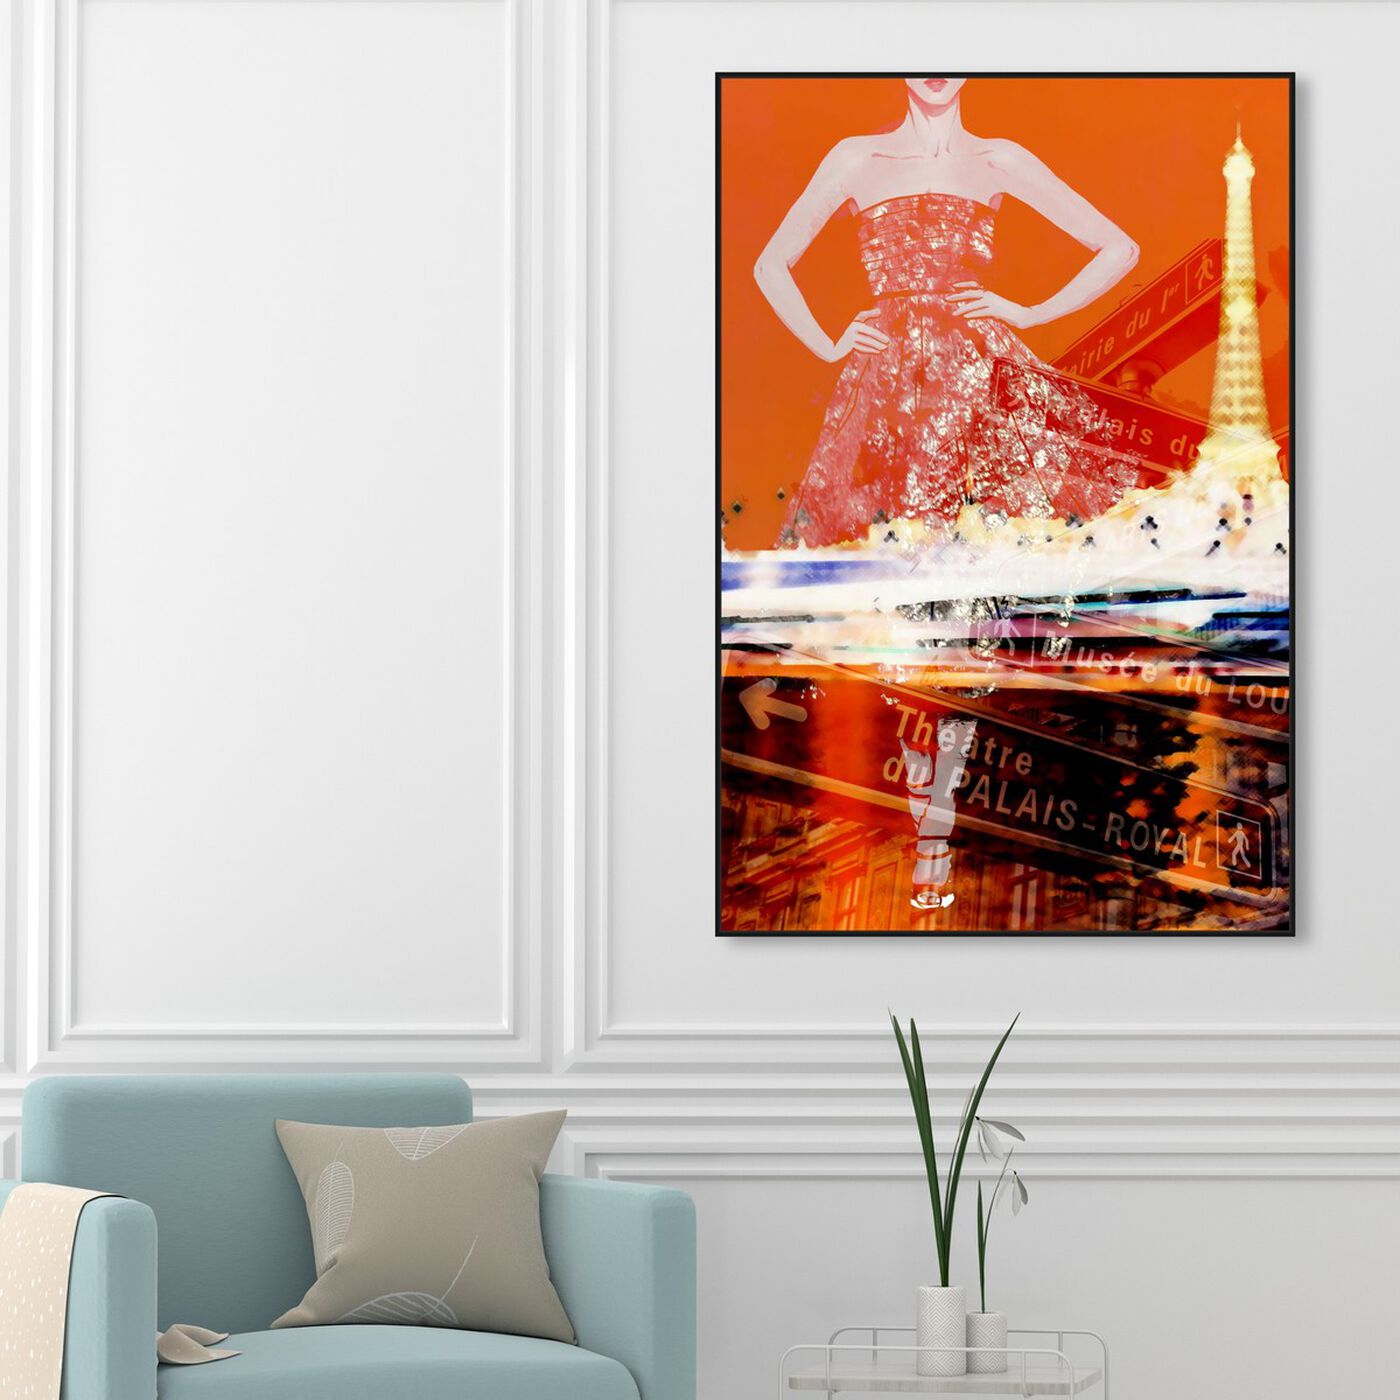 Hanging view of Paris Is My Runway featuring fashion and glam and dress art.